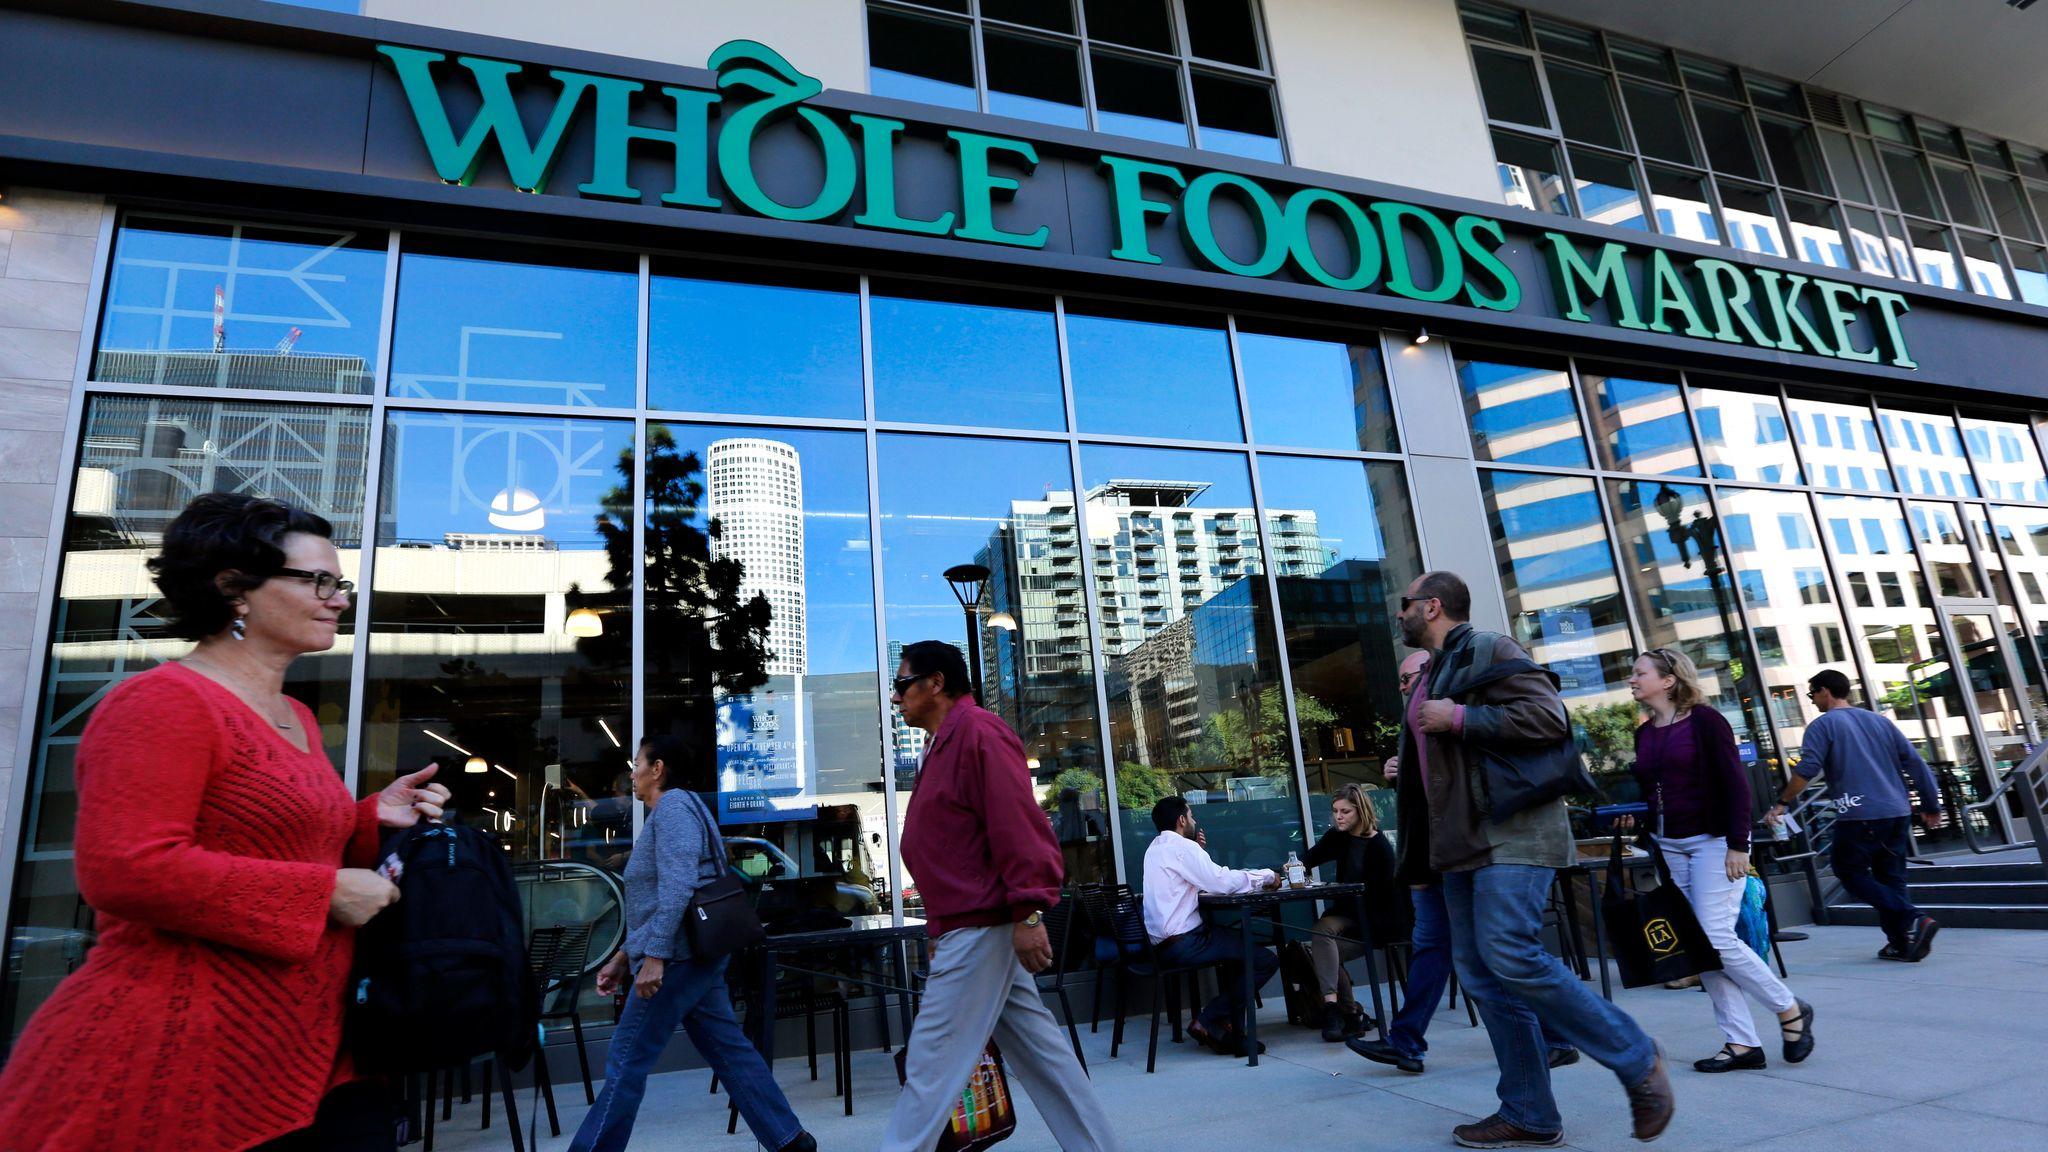 Pedestrians make their way past a Whole Foods Market on Grand Avenue in downtown Los Angeles during the store's grand opening on December 4, 2015.